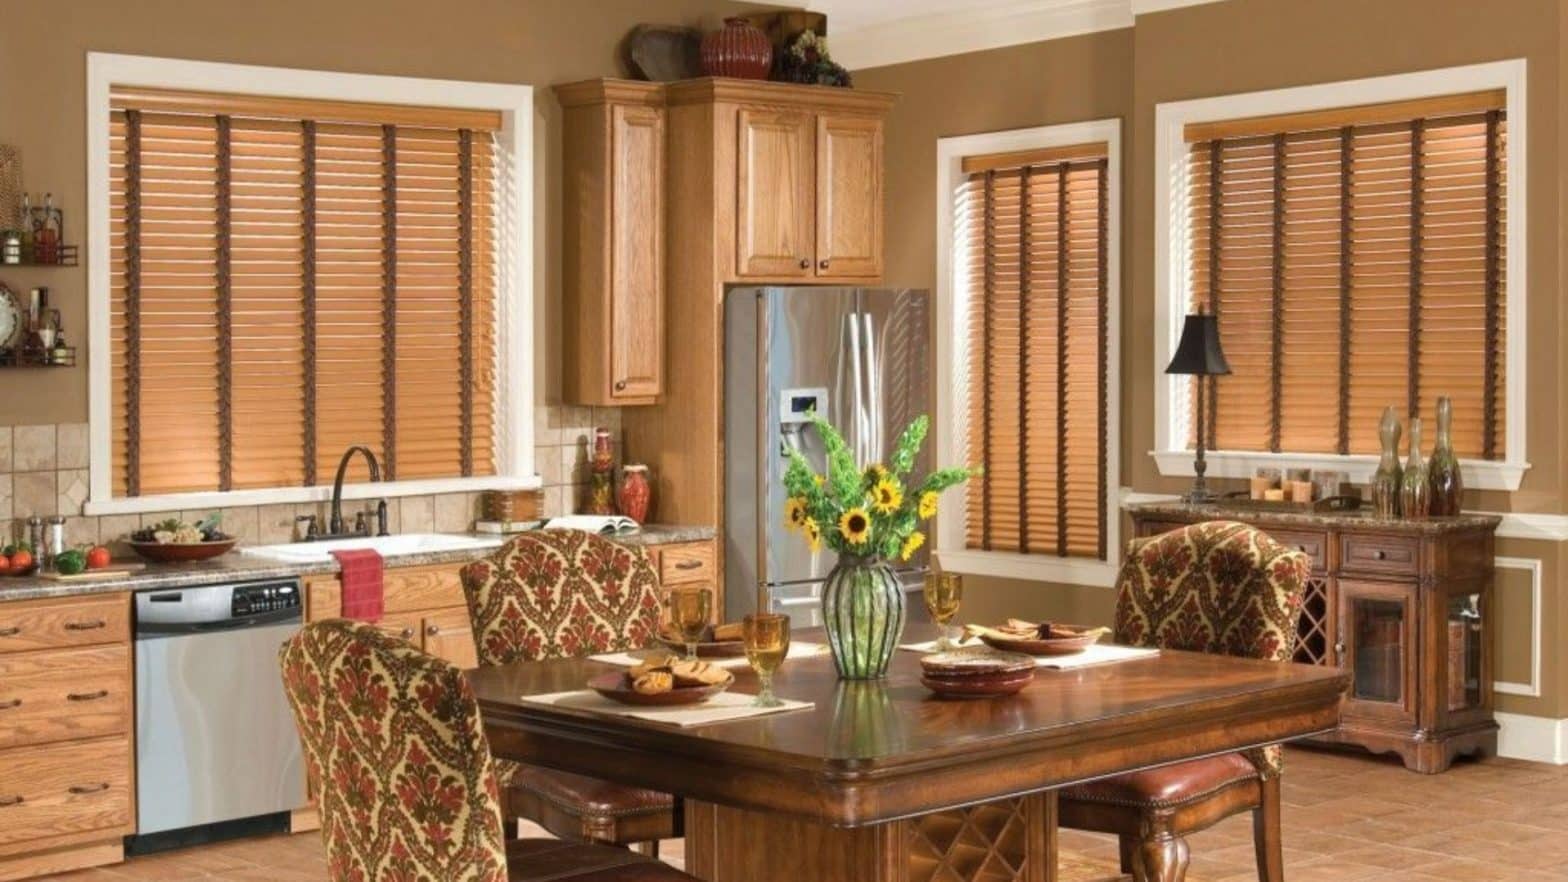 What Makes Wooden Blinds a Timeless Choice for Homes